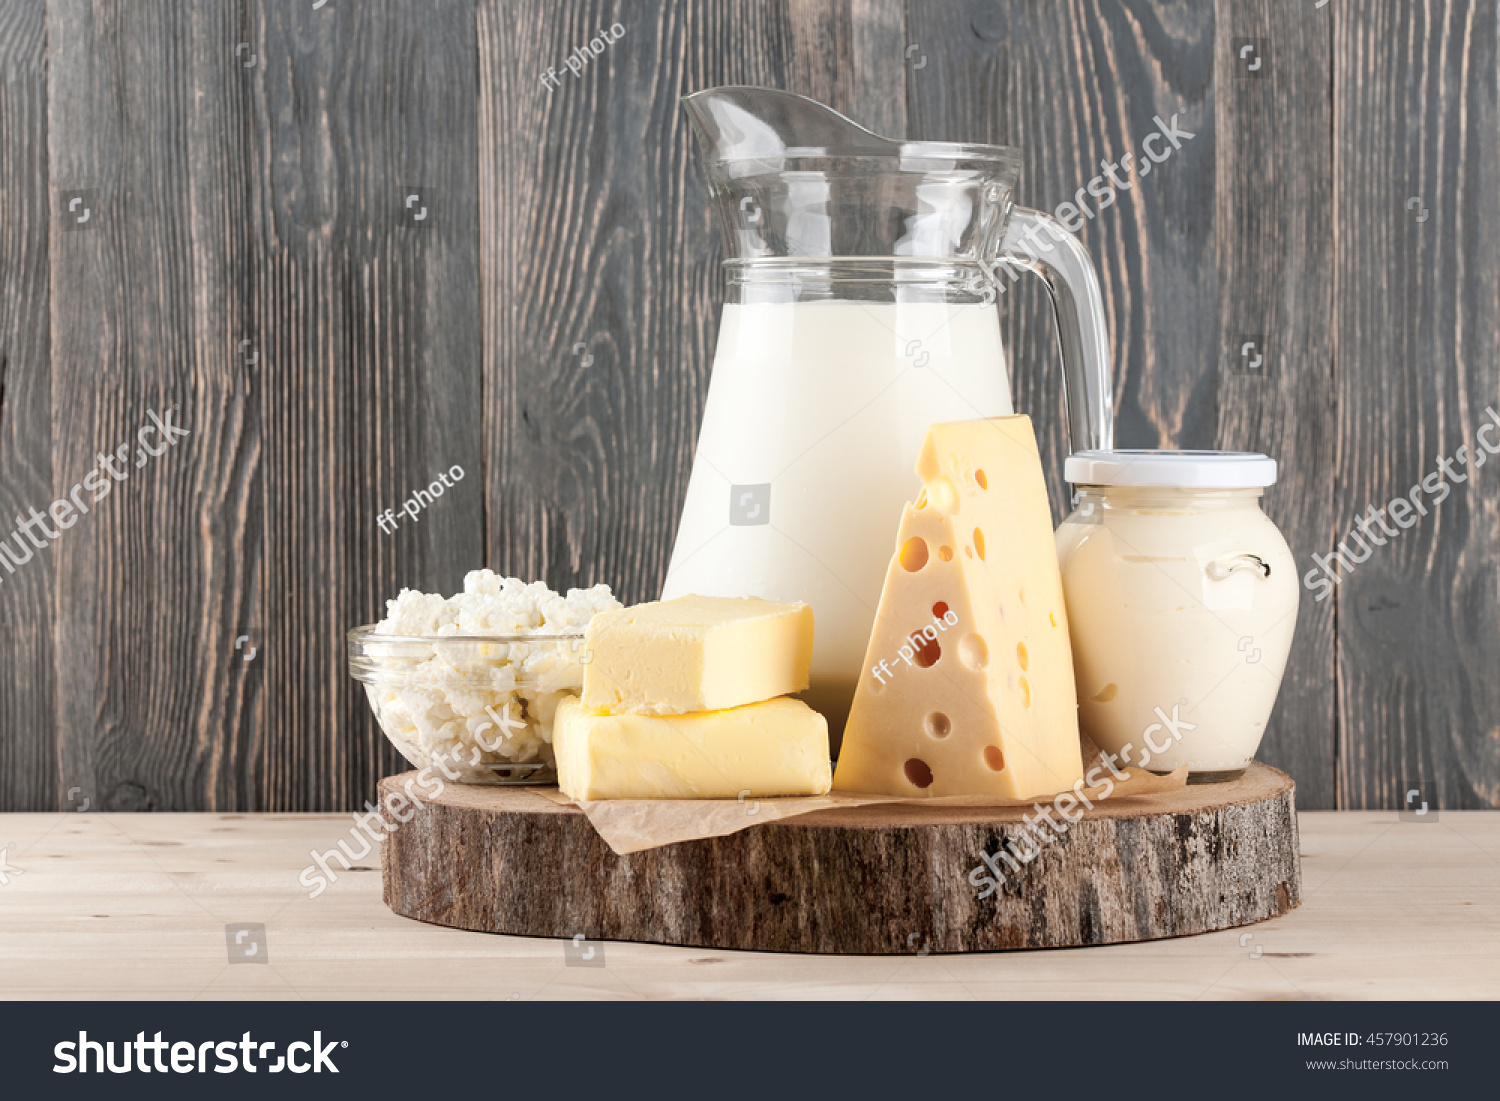 Dairy products on wood #457901236